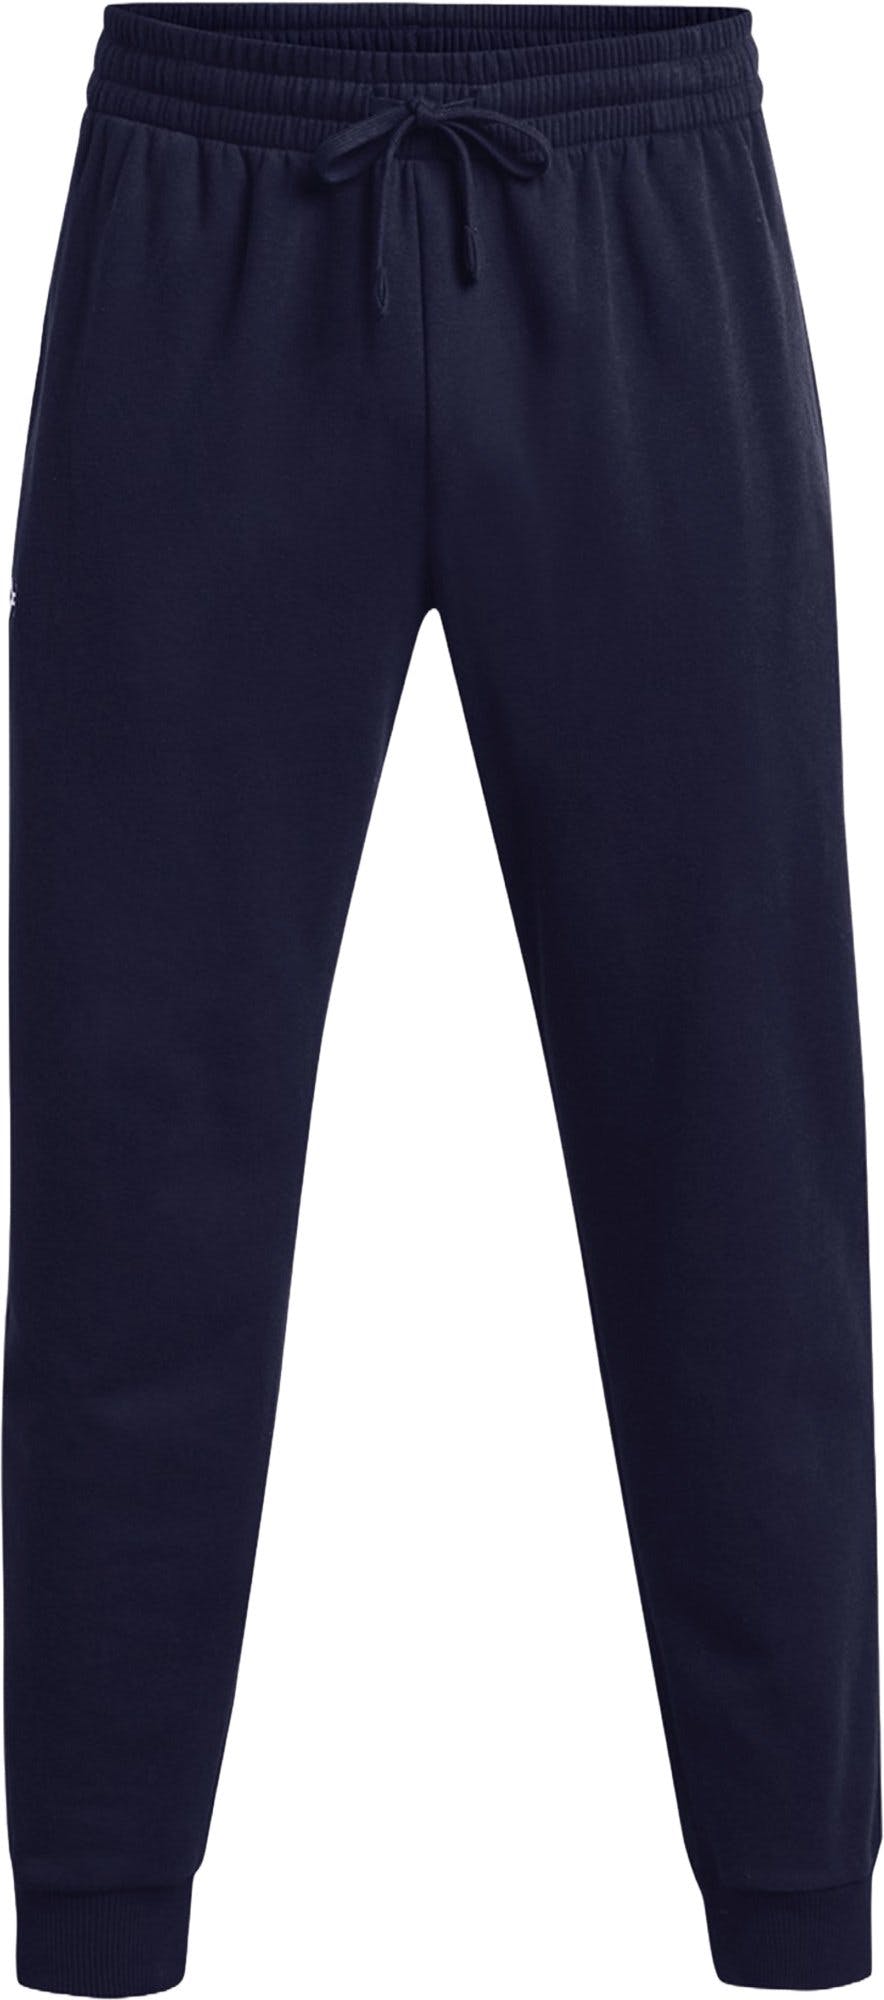 Product image for Rival Fleece Joggers - Men's